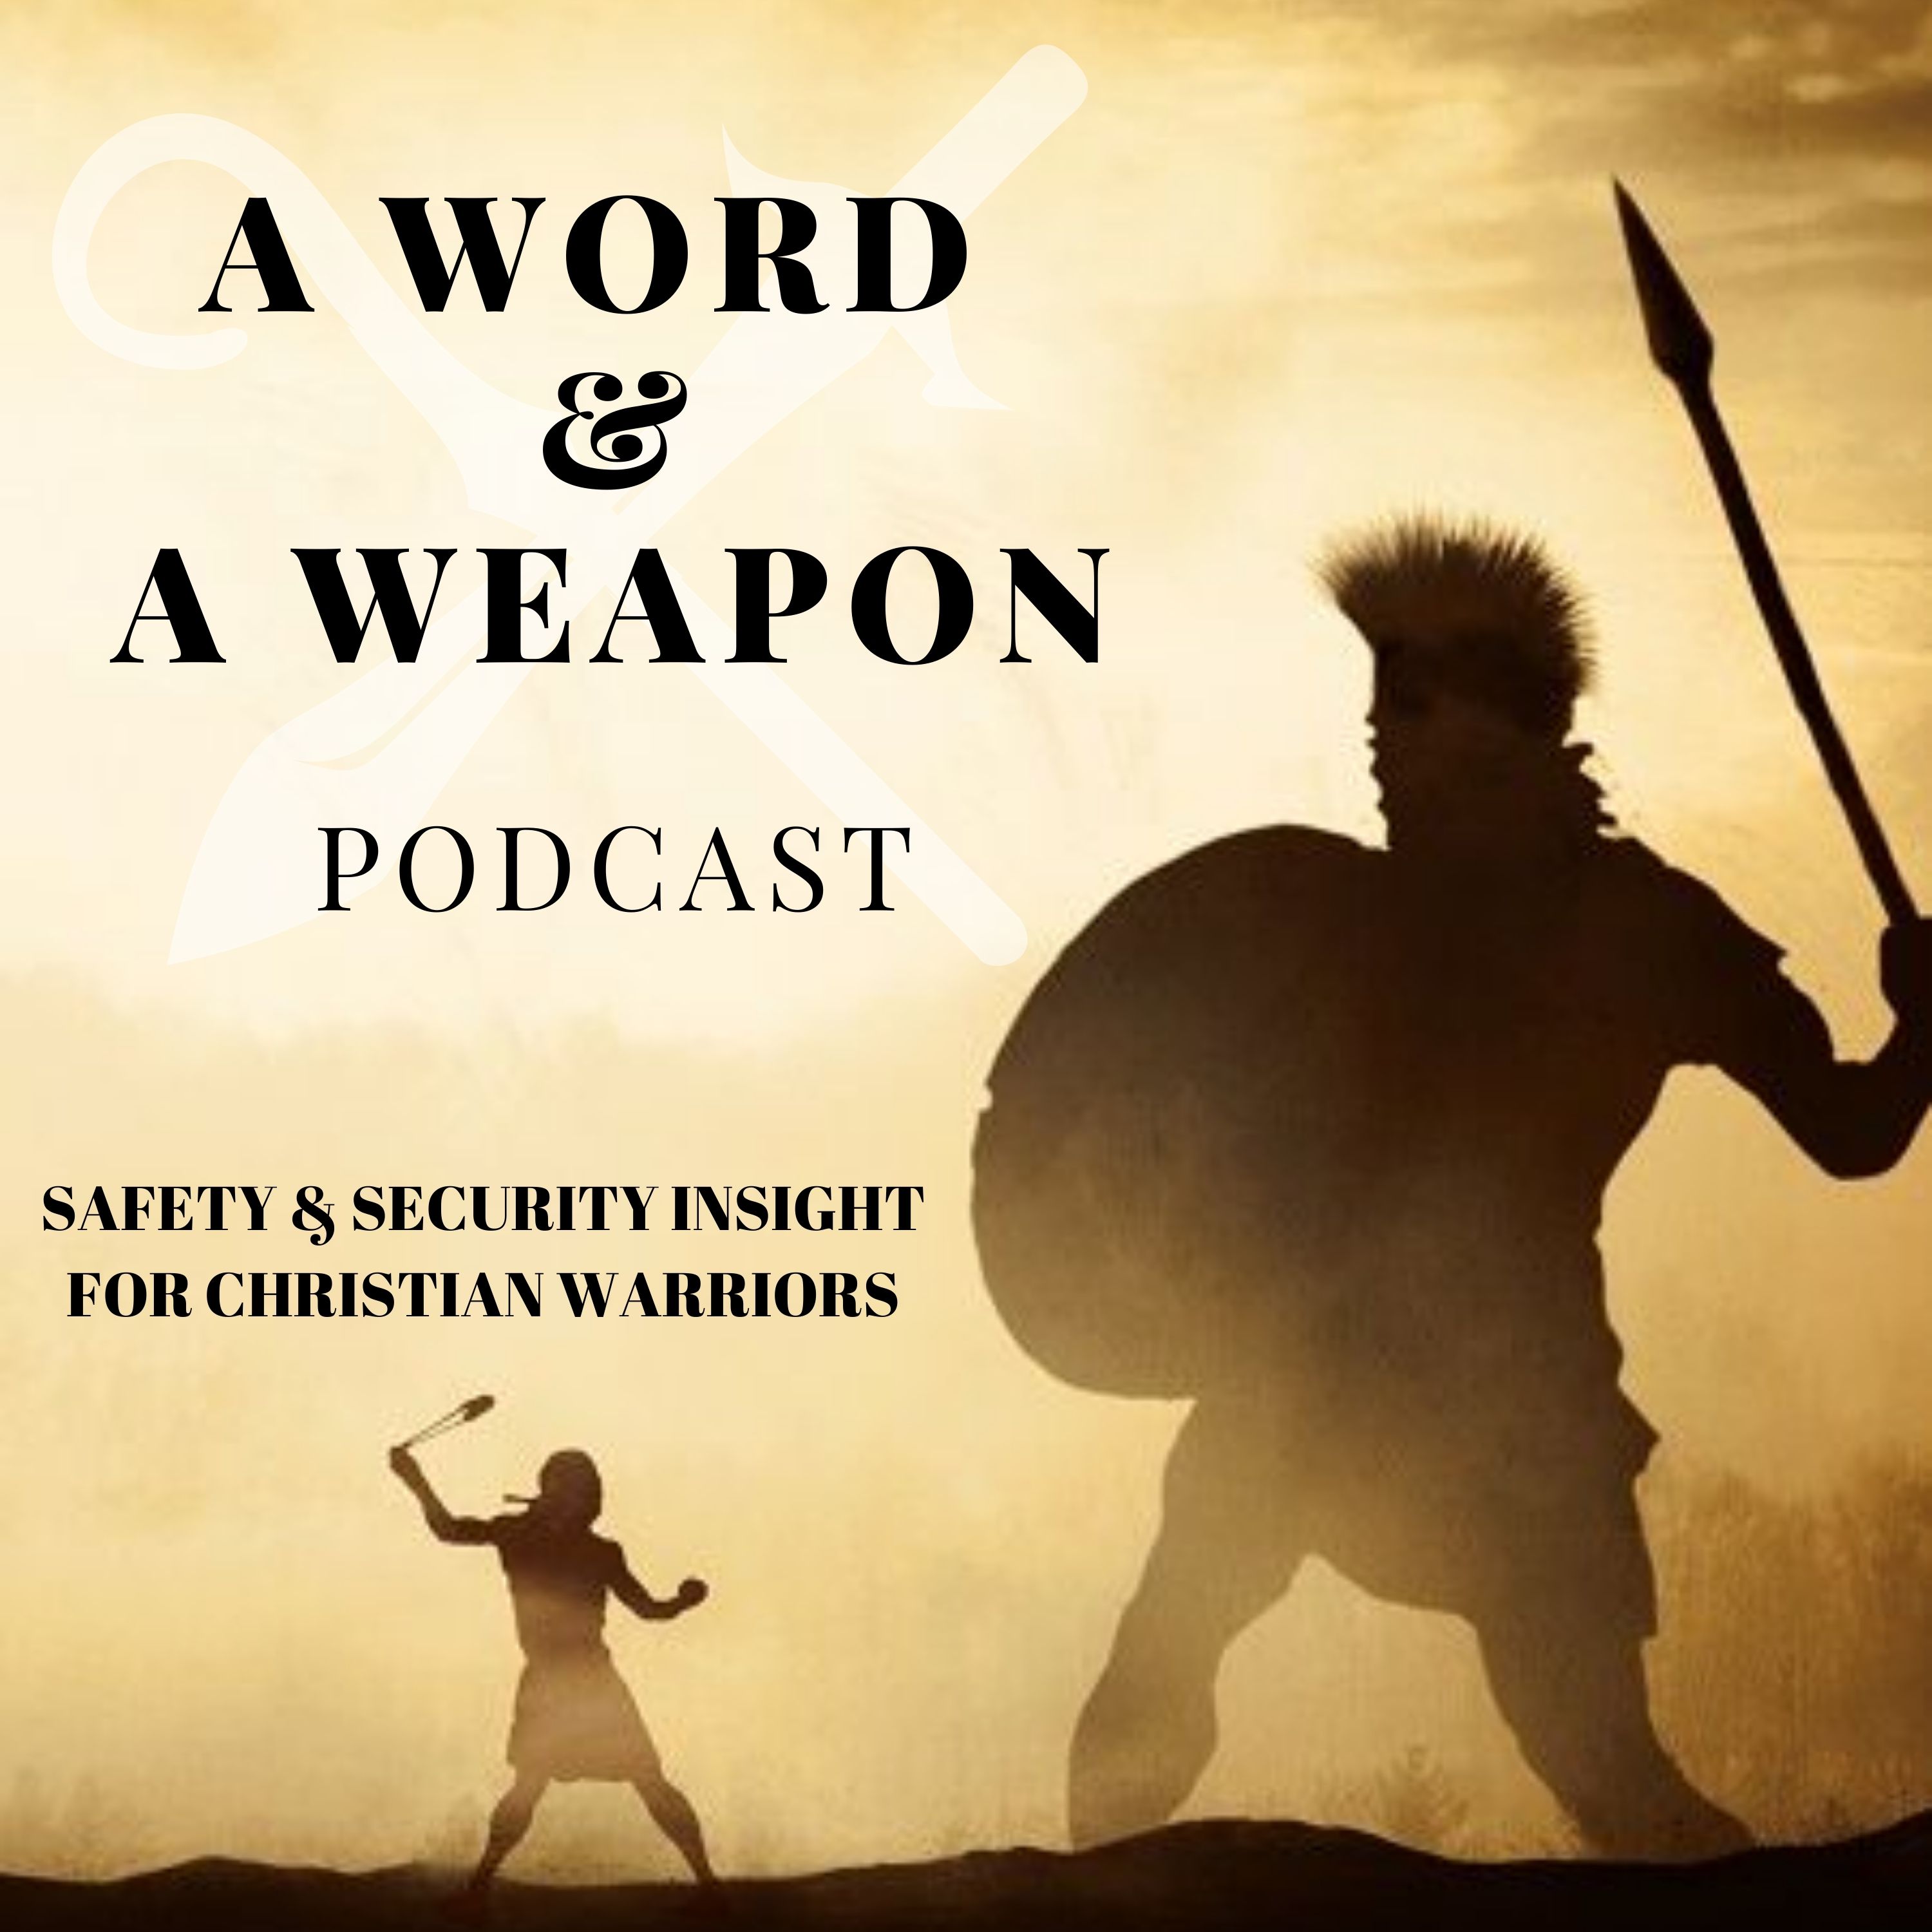 Artwork for podcast A Word & A Weapon Podcast